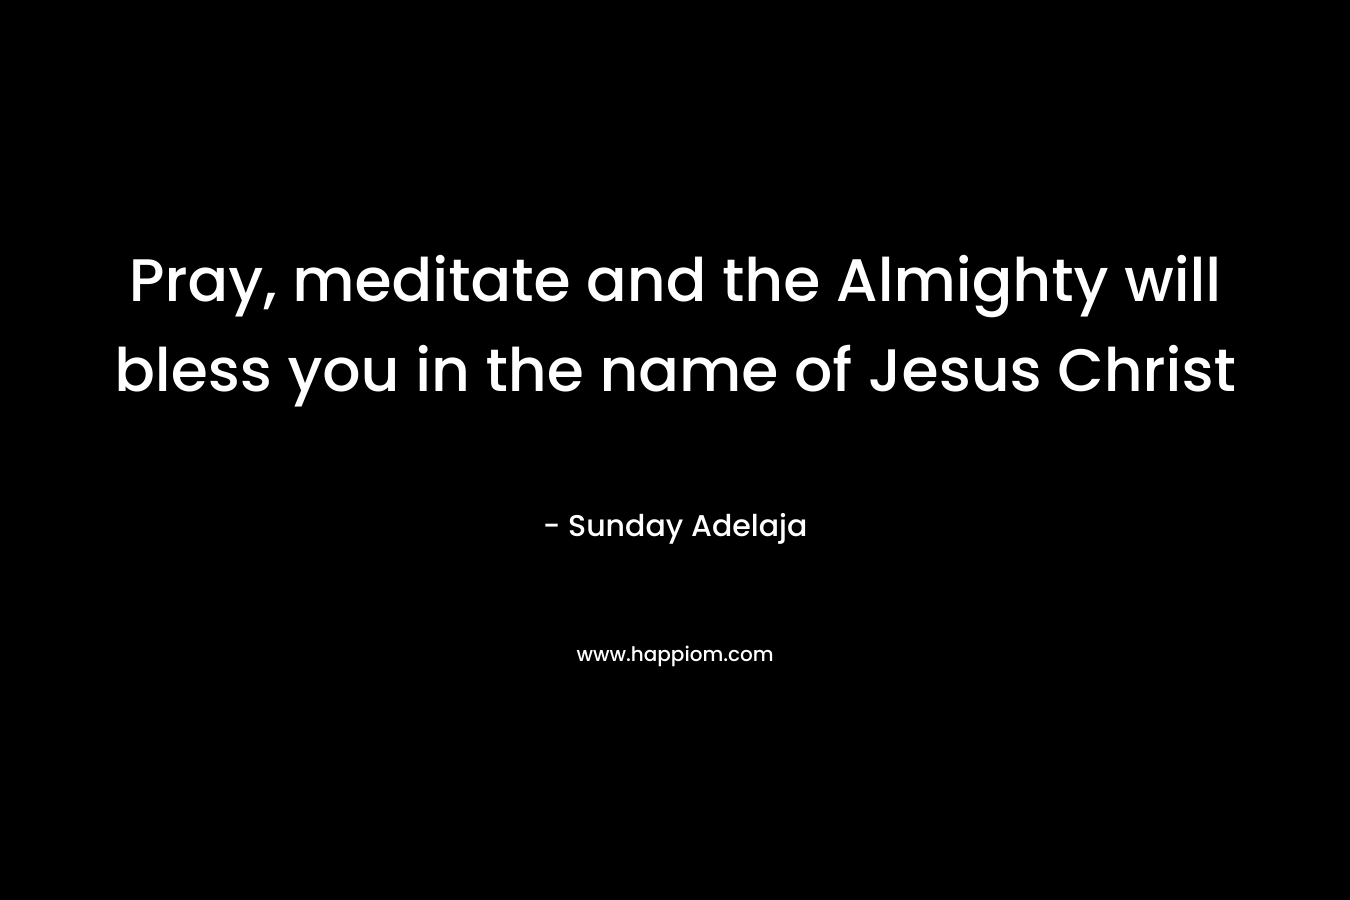 Pray, meditate and the Almighty will bless you in the name of Jesus Christ